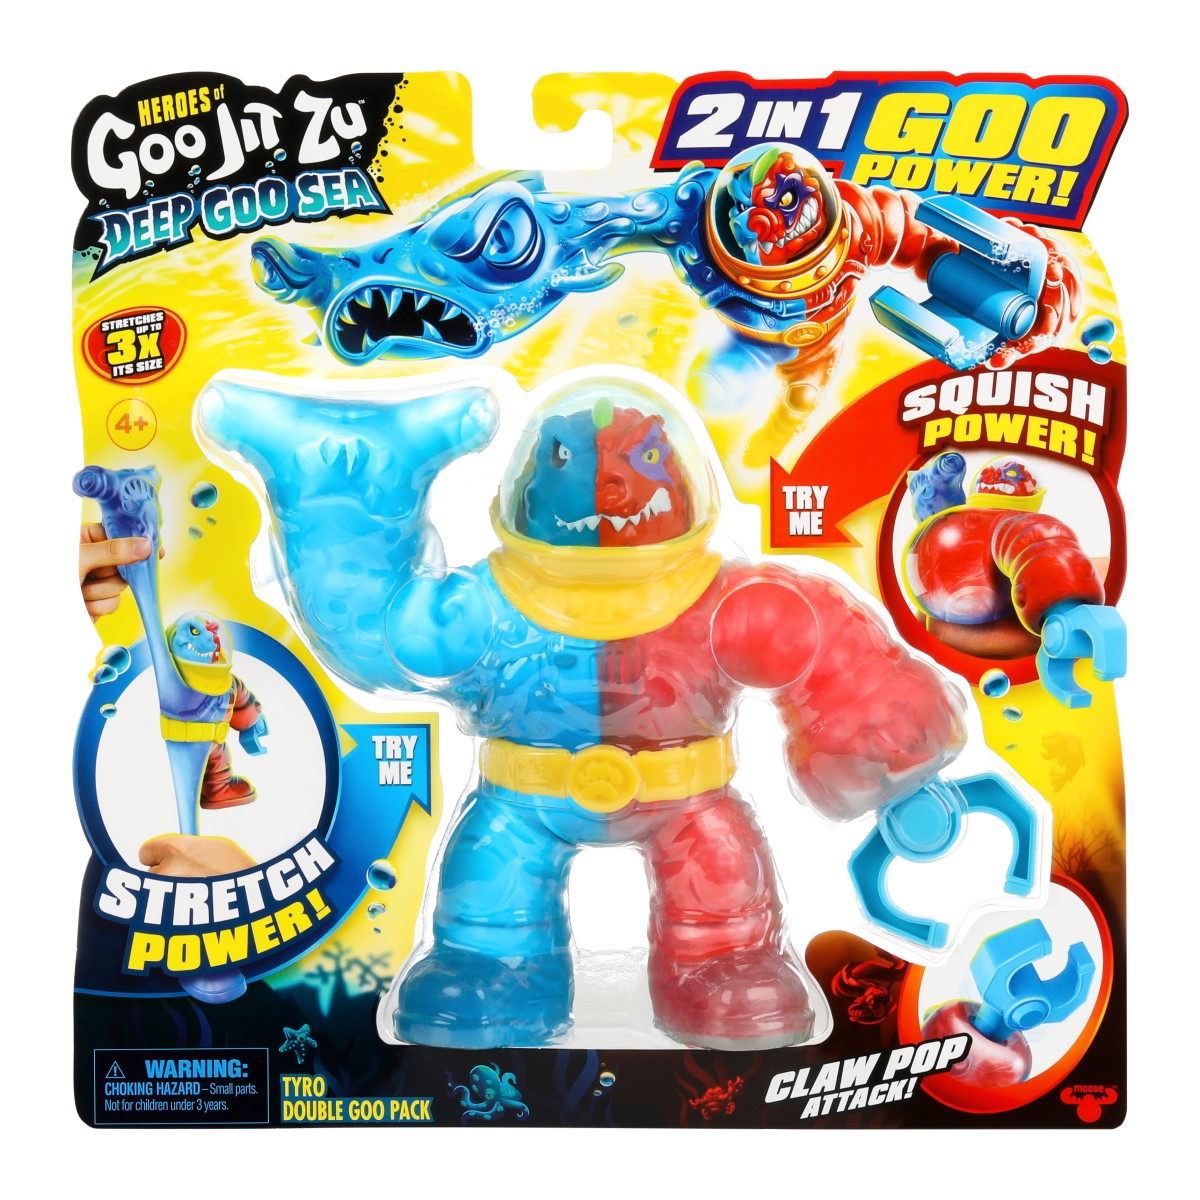 Heroes of Goo Jit Zu: Deep Goo Sea Collectible Stretchy Action Figure Toys  New